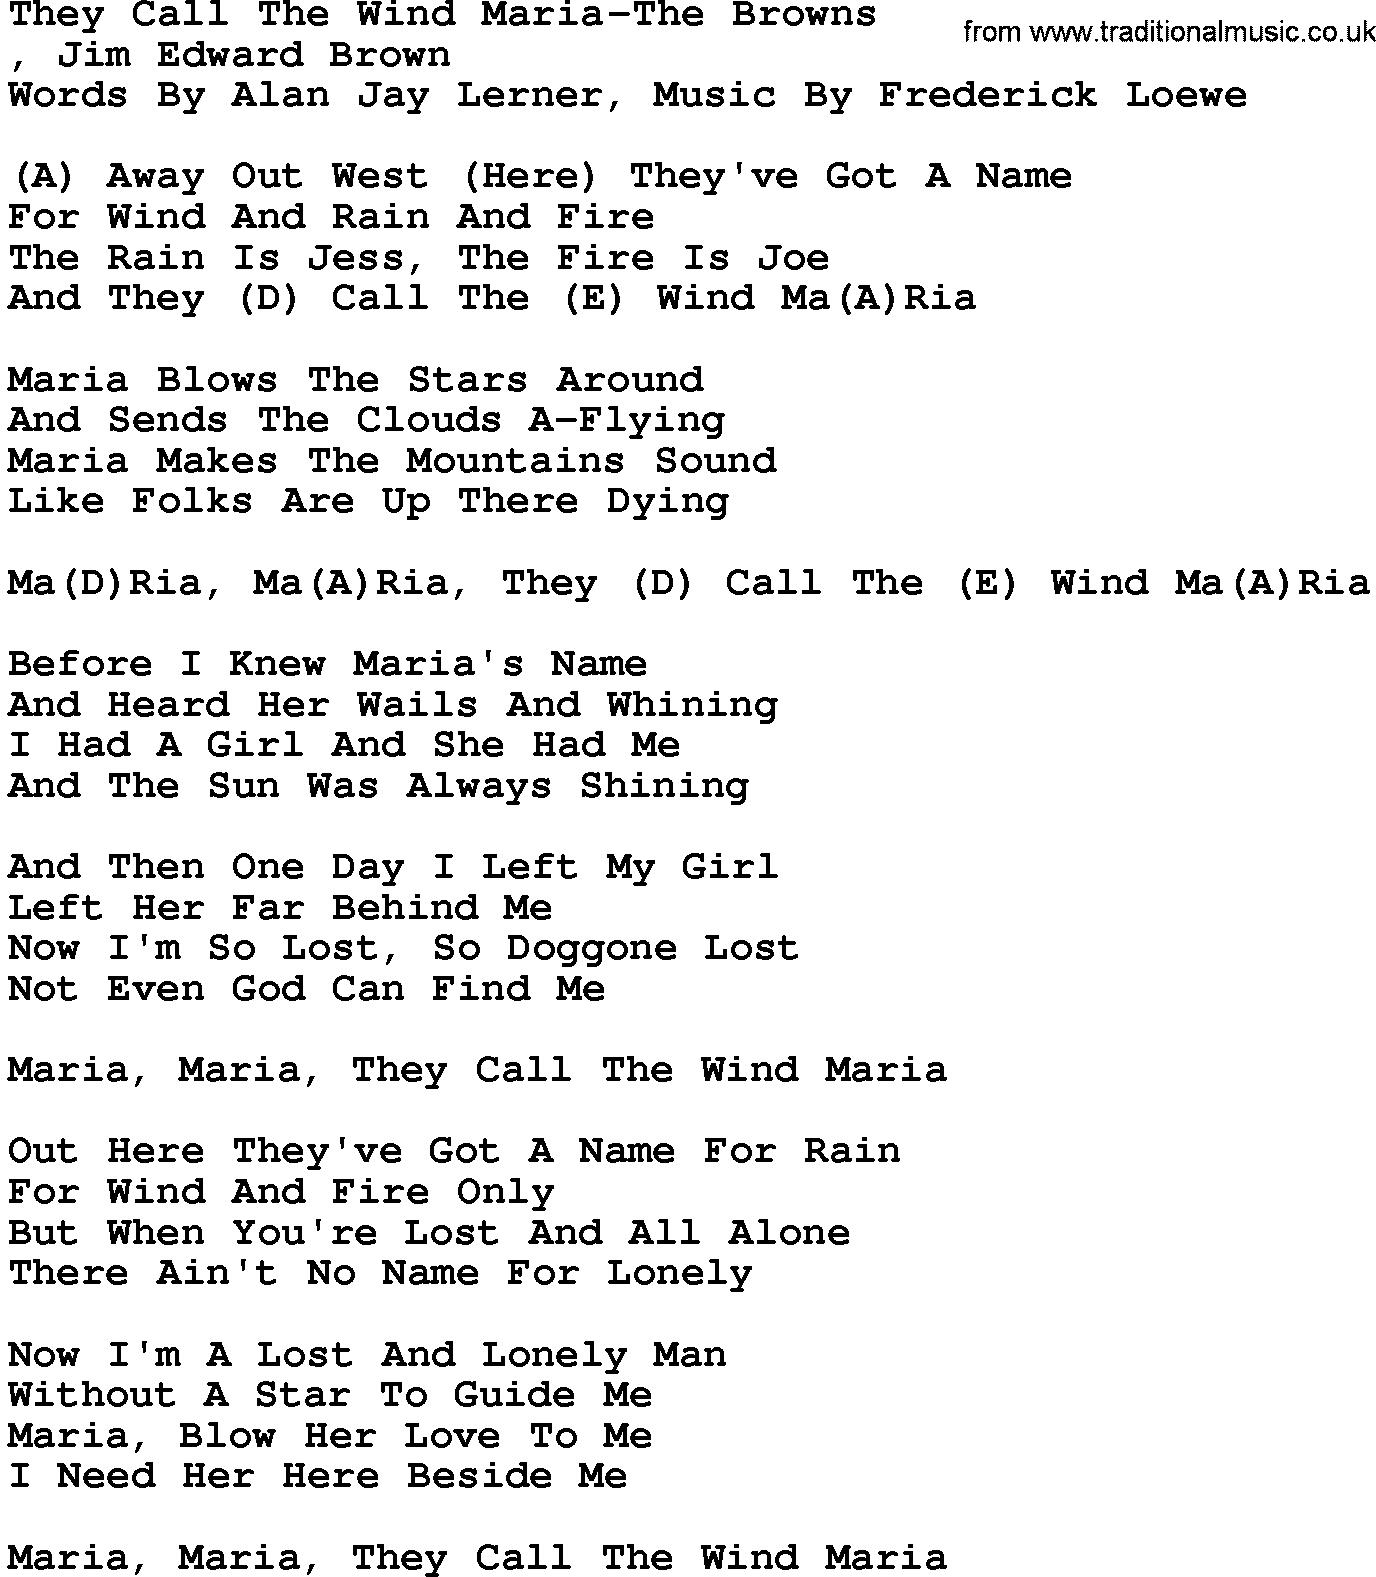 Country music song: They Call The Wind Maria-The Browns lyrics and chords